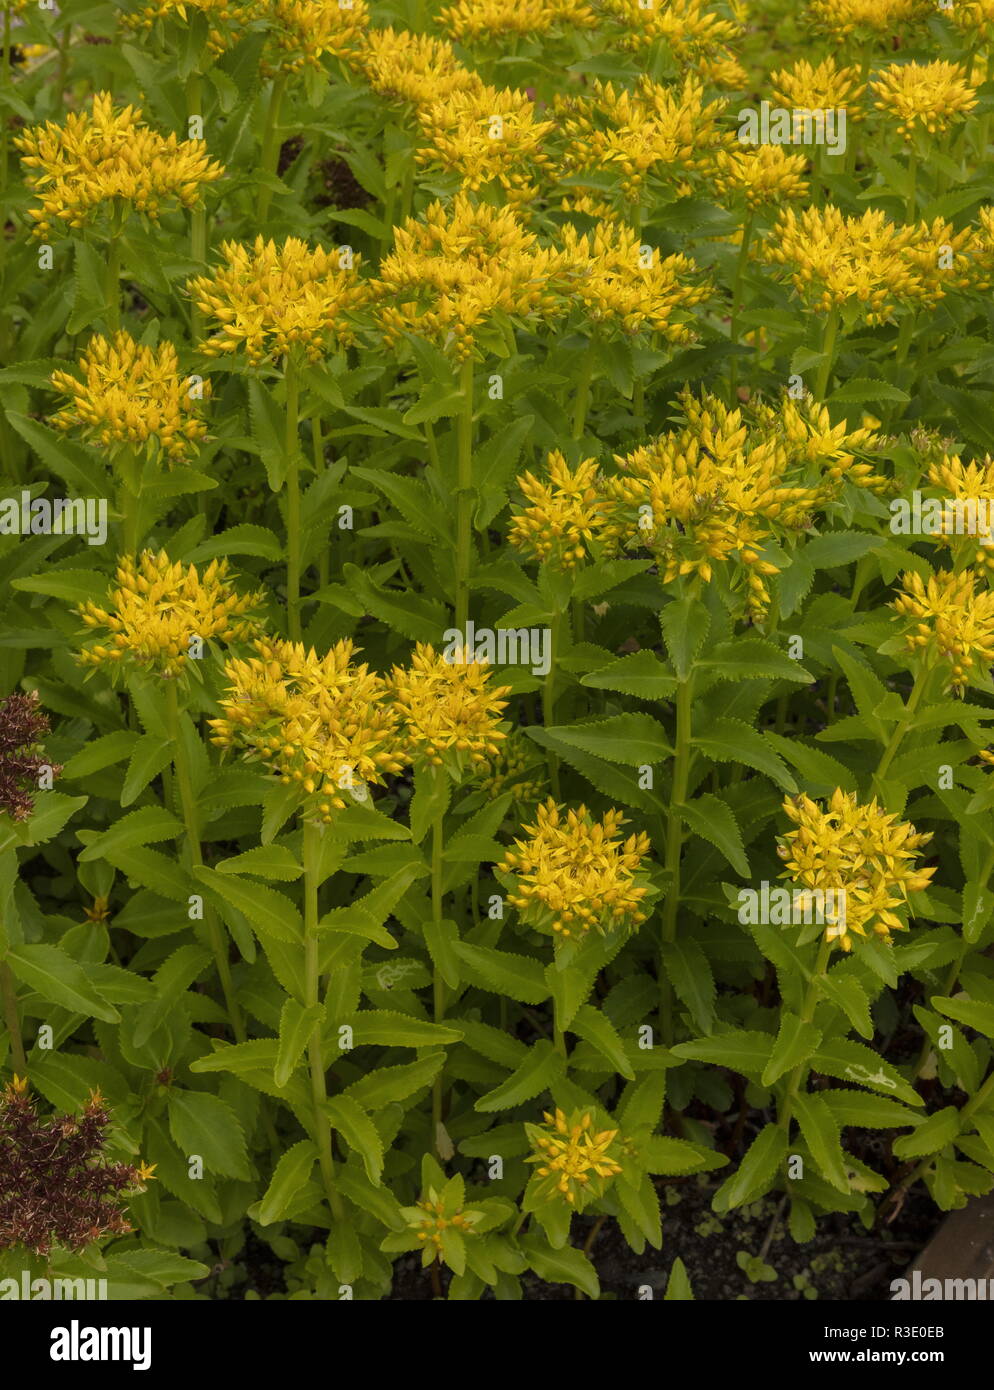 Aizoon stonecrop, Sedum aizoon, in cultivation; from Japan and eastern Asia. Stock Photo